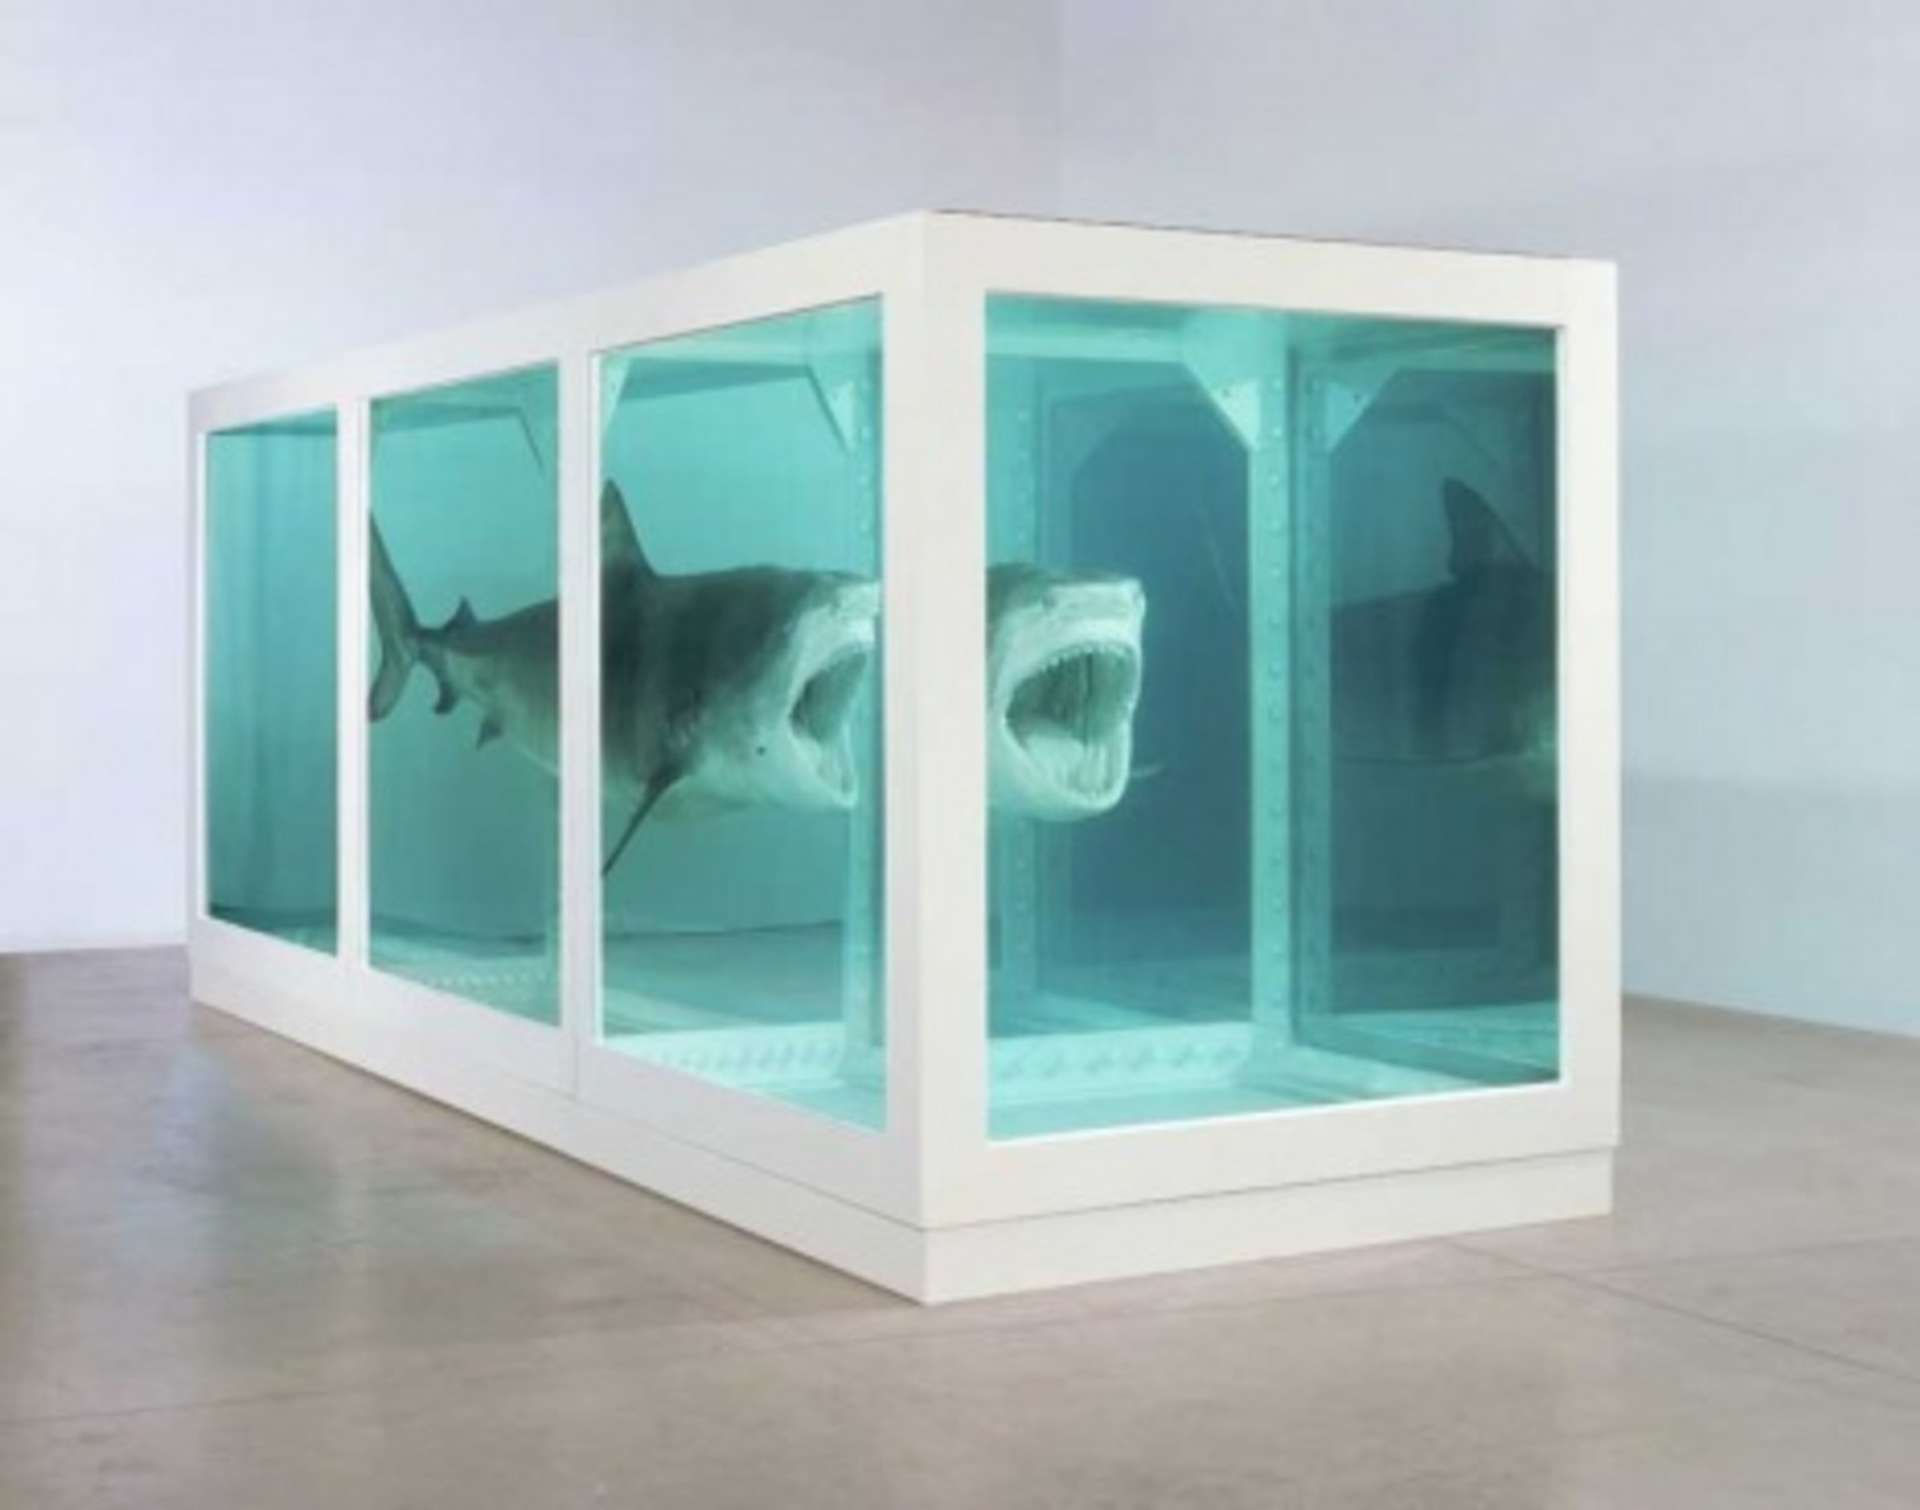 An image of the work The Physical Impossibility Of Death In The Mind Of Someone Living by Damien Hirst. It shows a large tiger shark preserved in formaldehyde, within a large glass tank divided in three sections by white frames